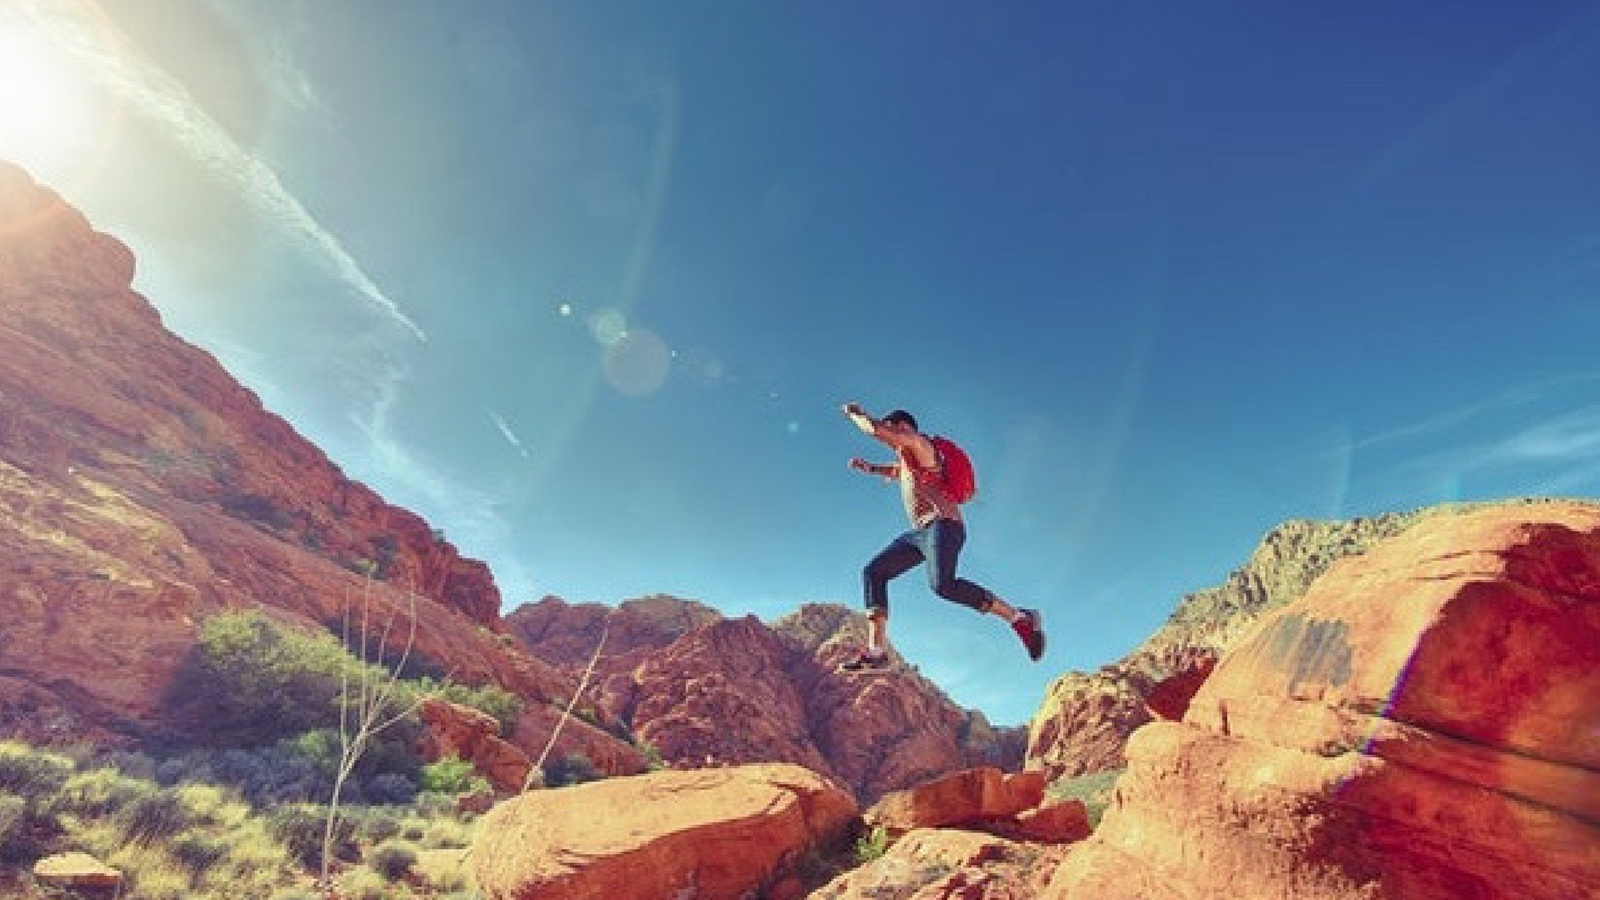 Man jumping through the air with desert landscape in the background